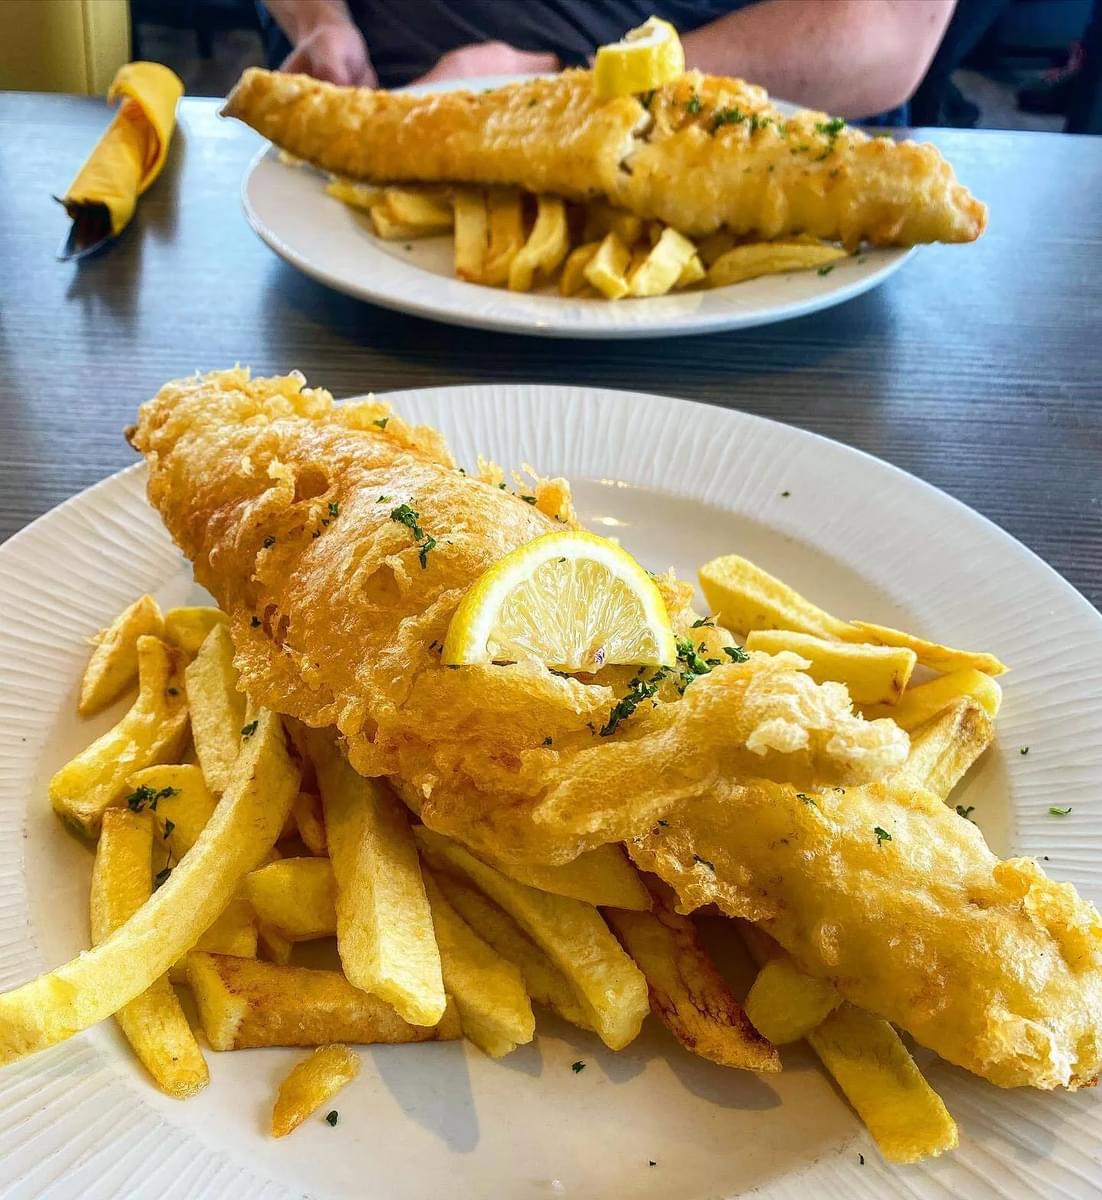 Craving a taste of seaside bliss this summer? Dive into our crispy golden fish and chips down at No1 Cromer 🍟 #norfolk #fishandchips #restaurant #cromerpier #cromercrab